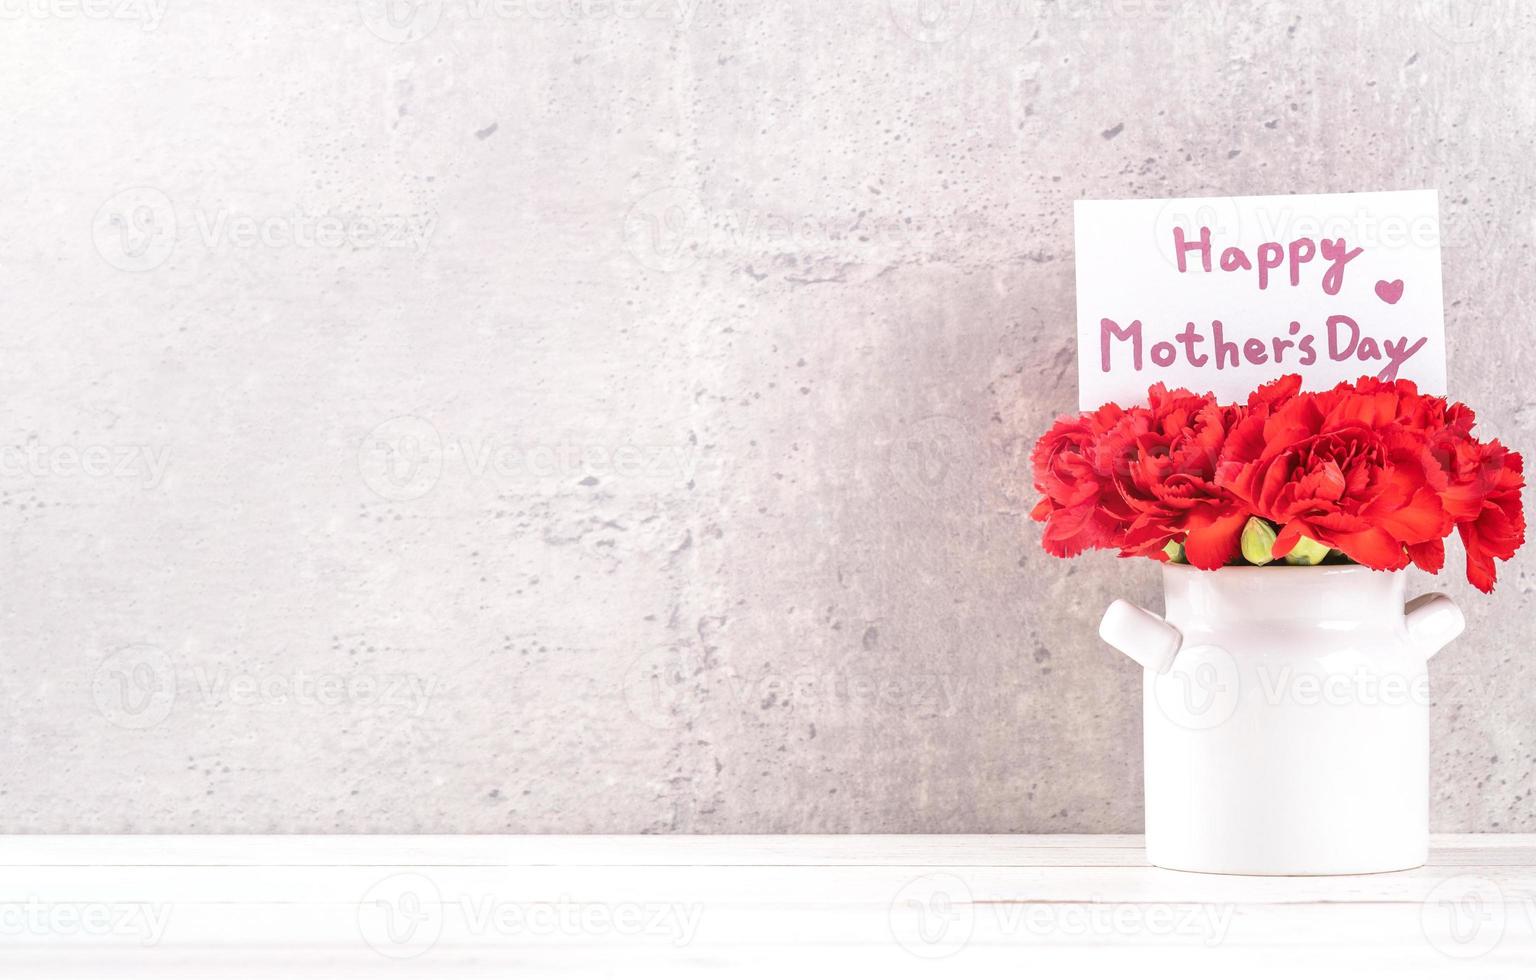 May mothers day handmade giftbox wishes design photography - Beautiful blooming carnations in vase isolated on gray, wooden background table, close up, copy space, mock up photo